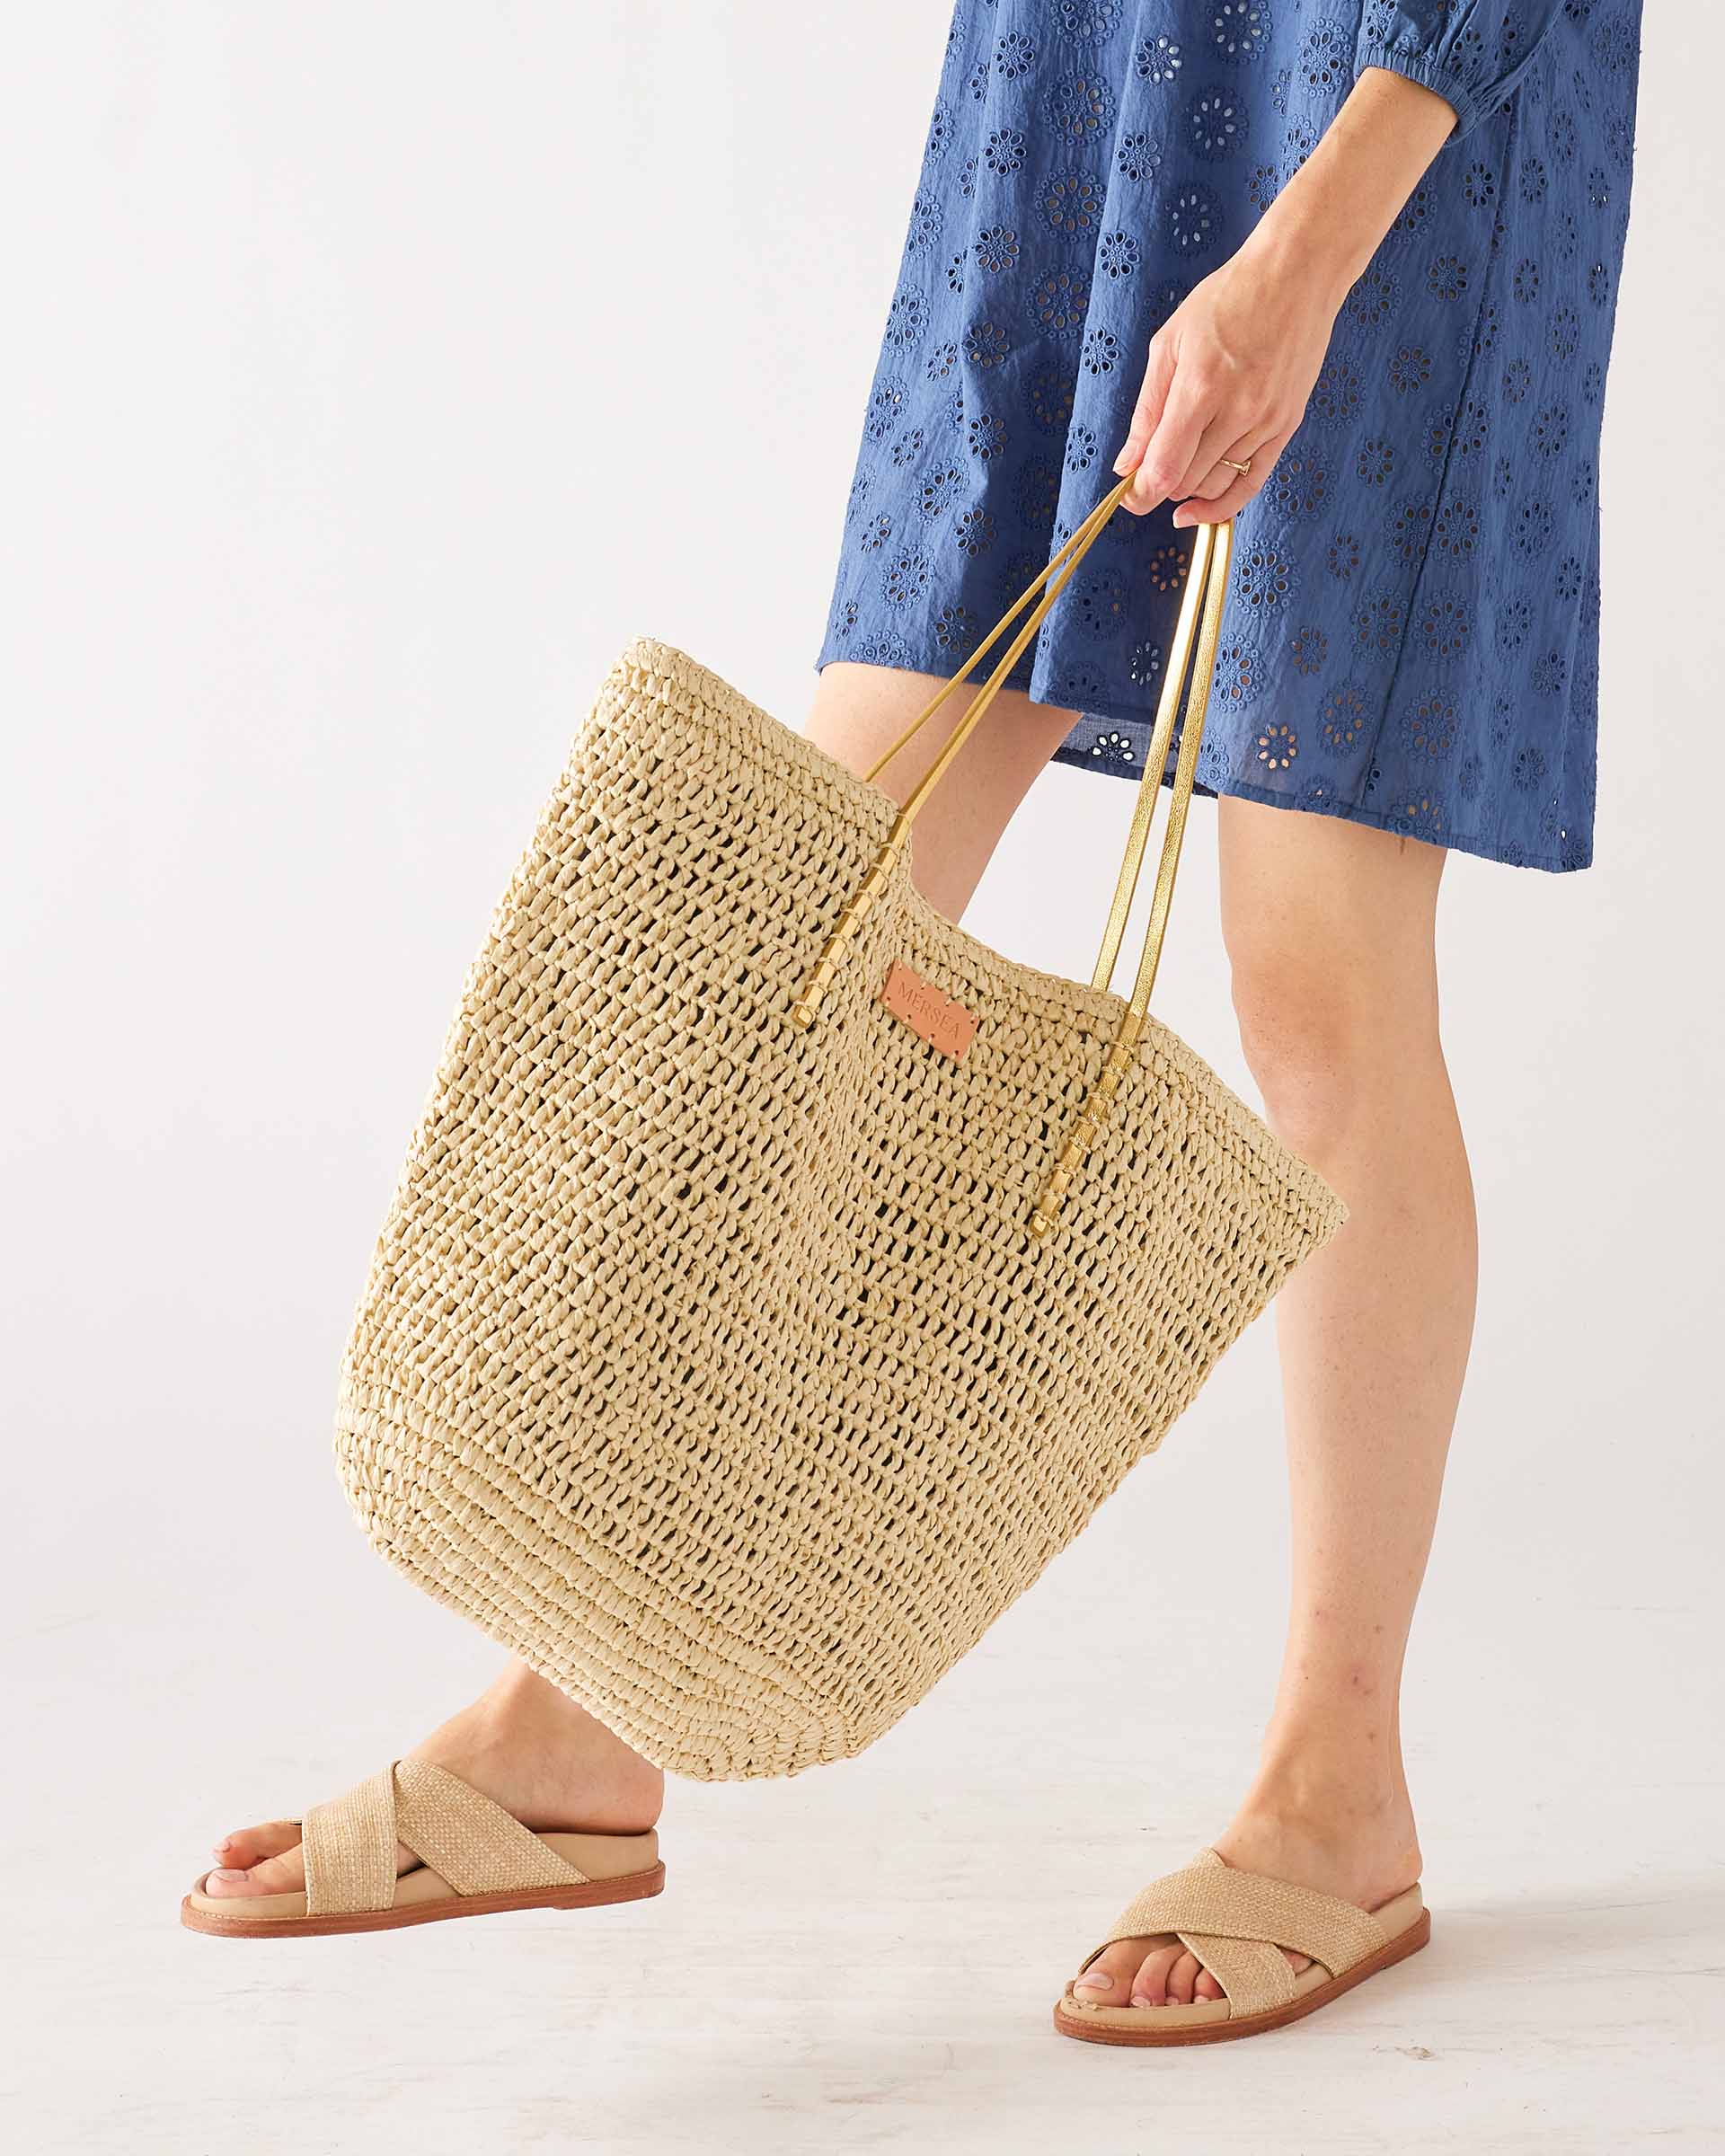 woman in blue dress holding sun chaser straw tote with sandals on